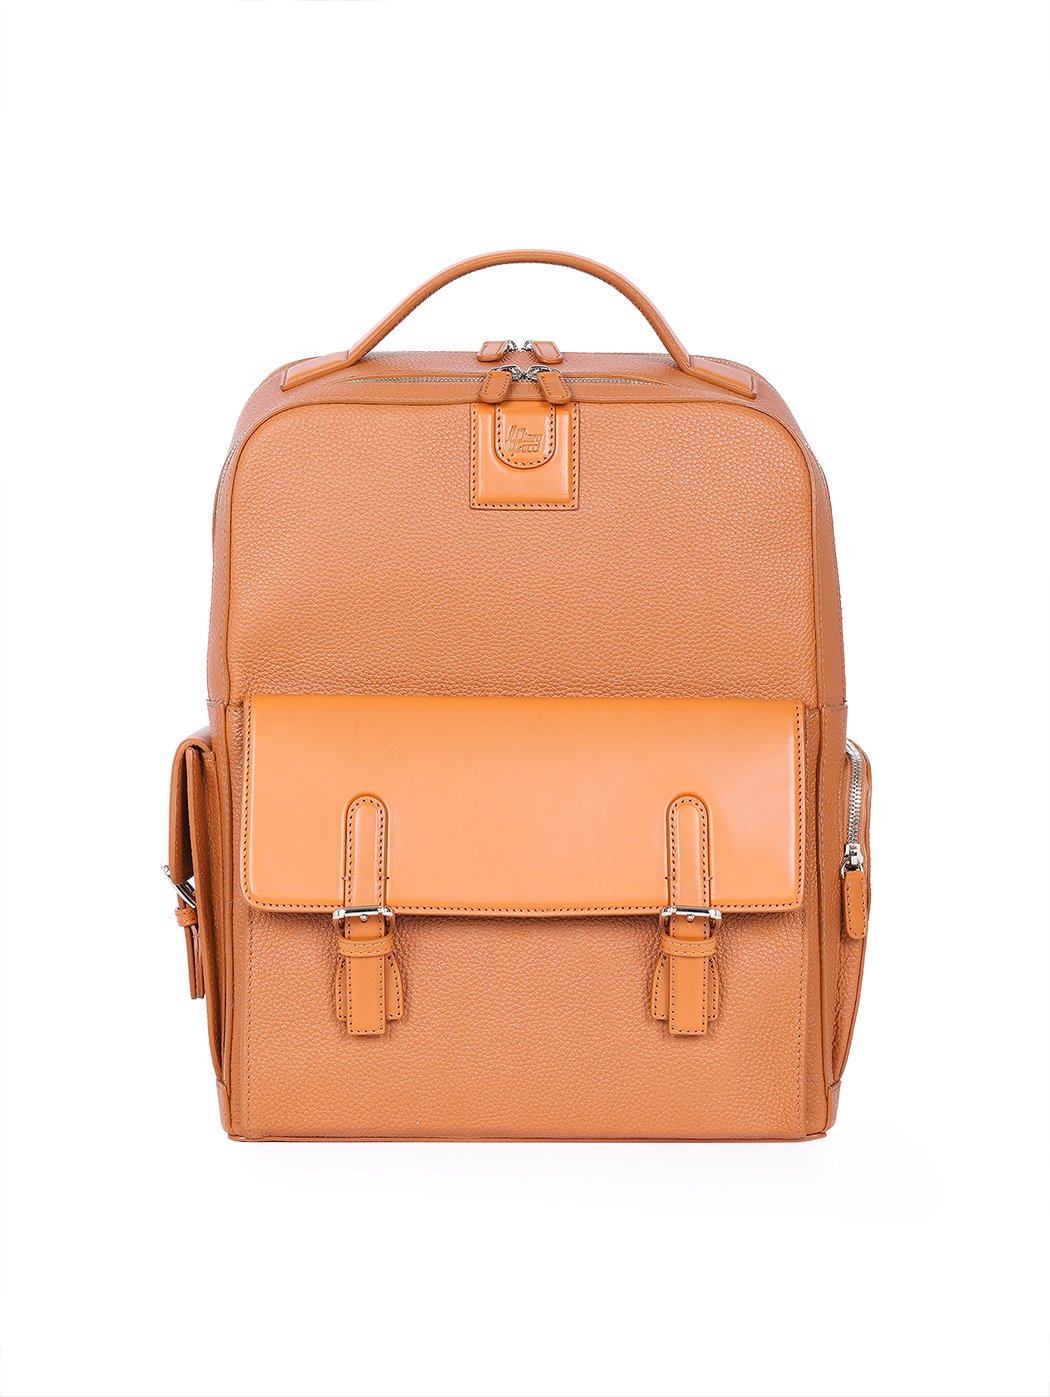 Professional Backpack Computer Leather Bag Tan